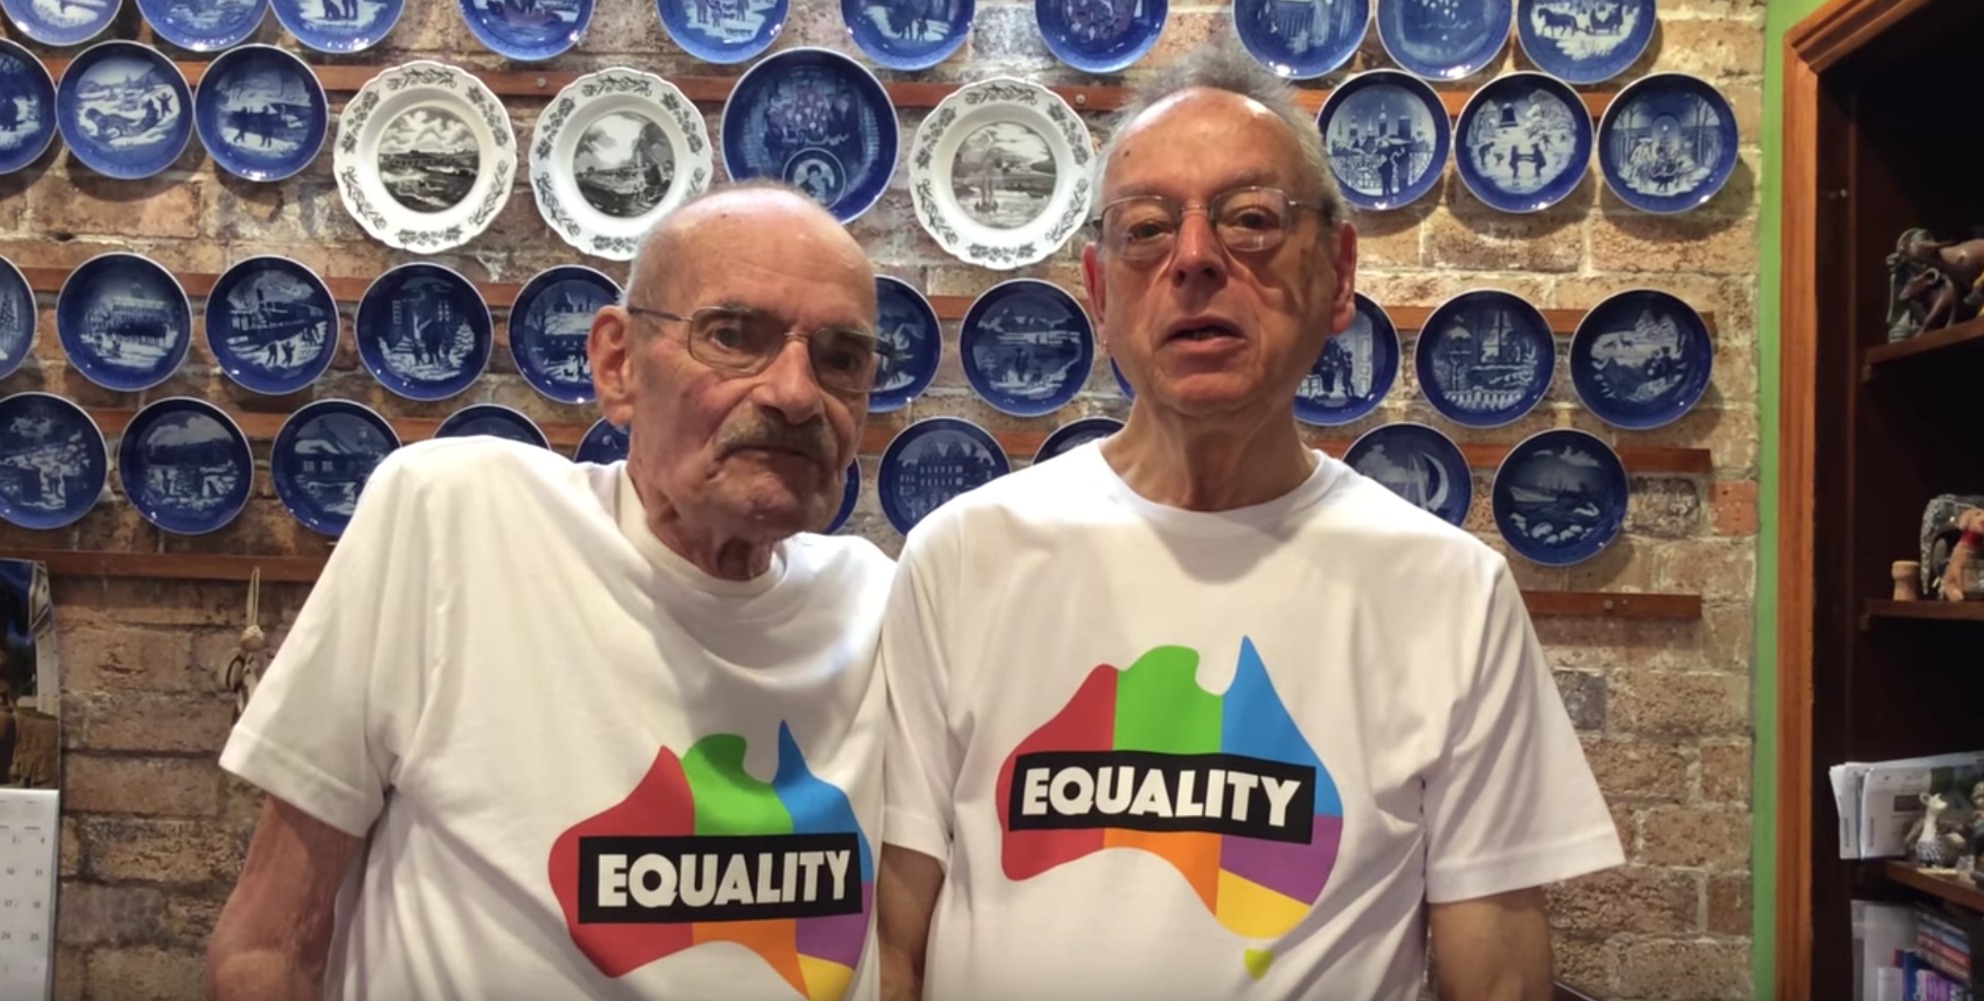 Aussie couple that said ‘I do’ fifty years ago urge government to let them marry